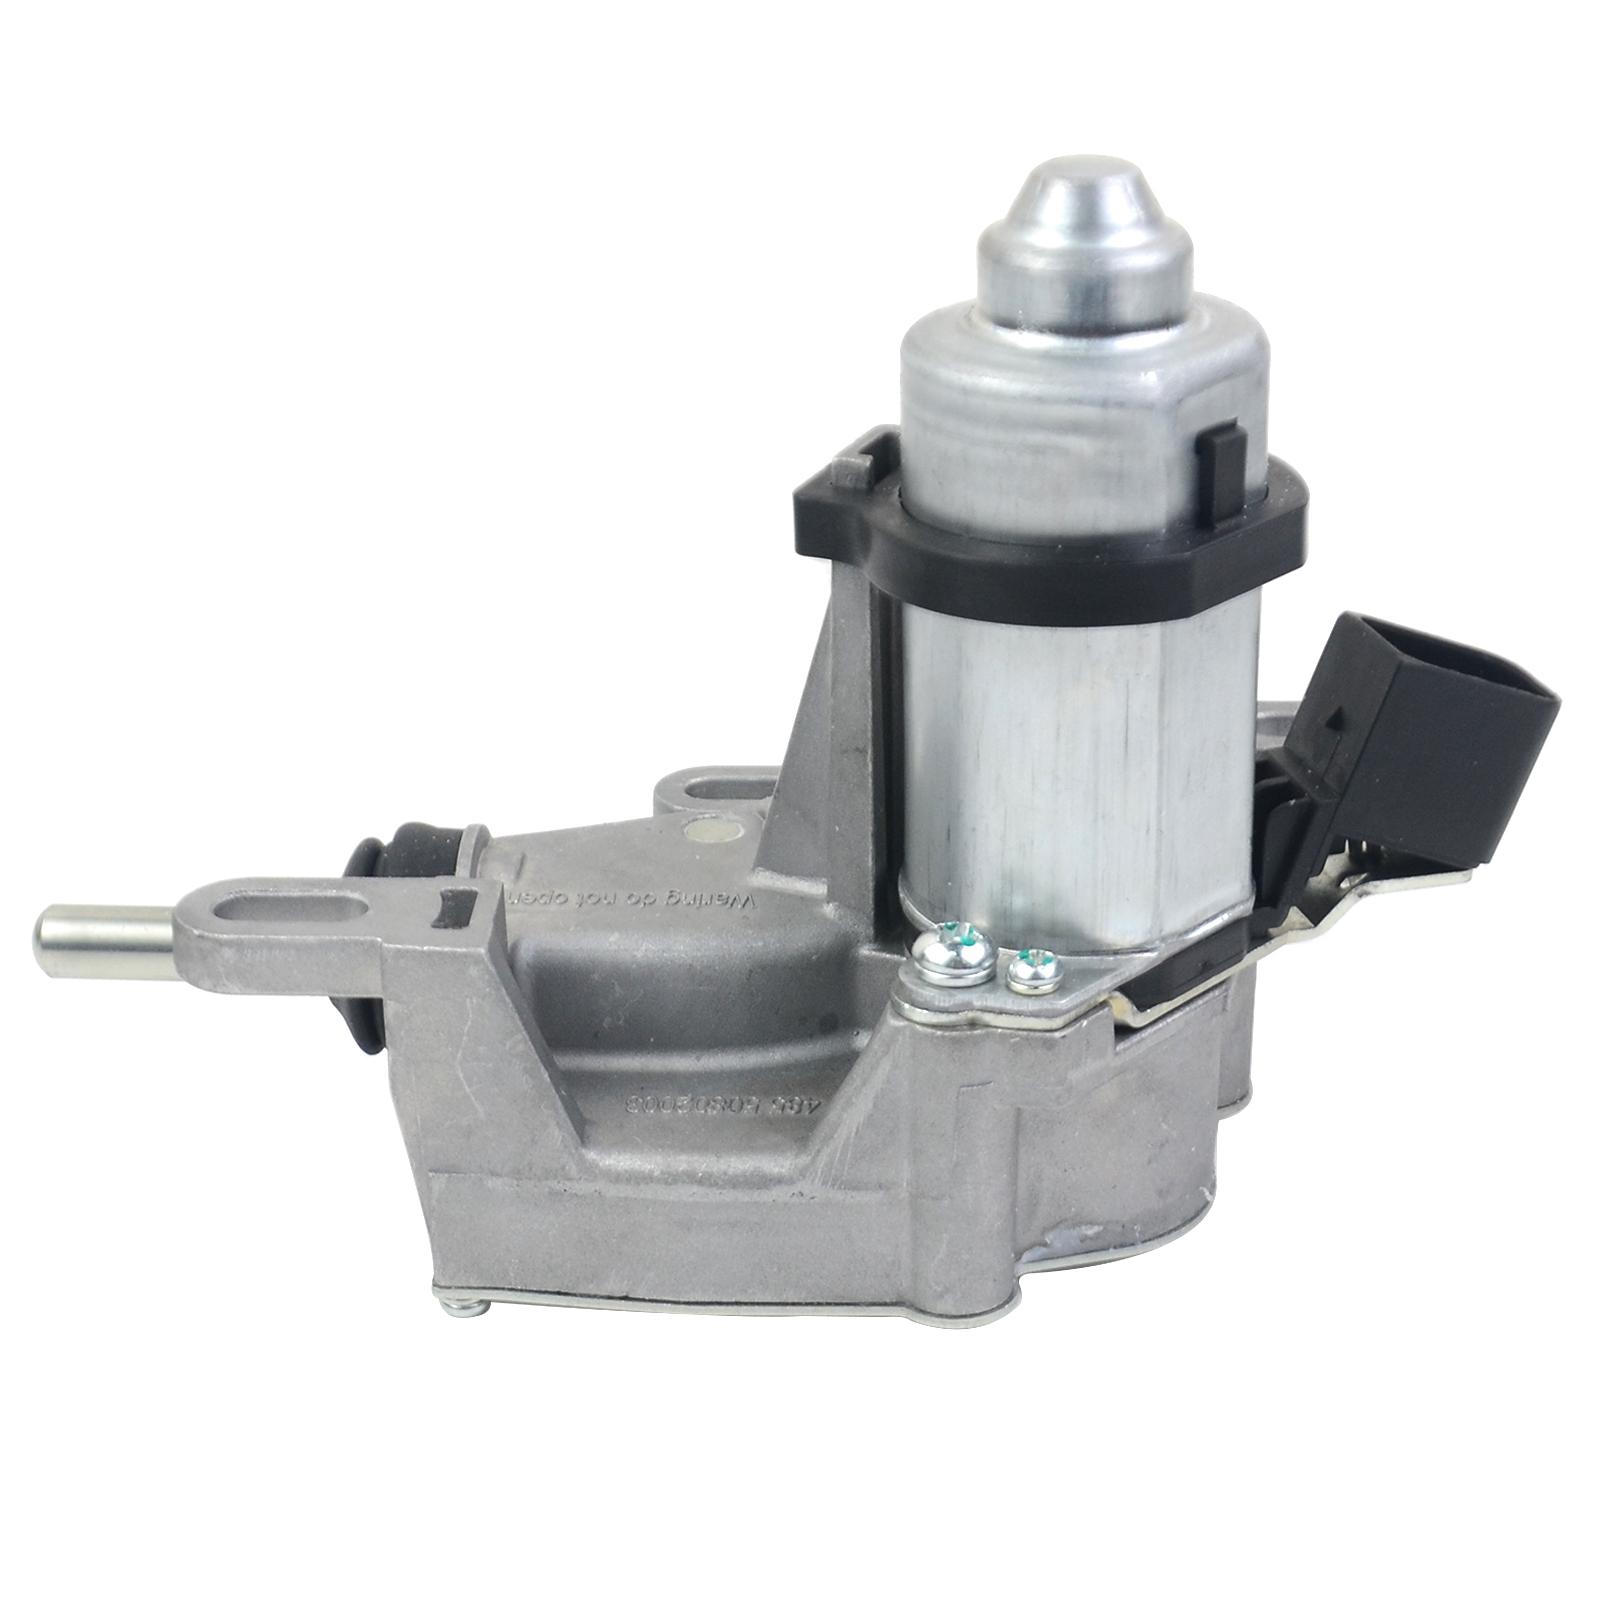 AP02 Sachs Clutch Slave Cylinder Actuator 3981000070 431 002 16 00 for Smart Cabrio City-Coupe Fortwo Roadster 1998-2007